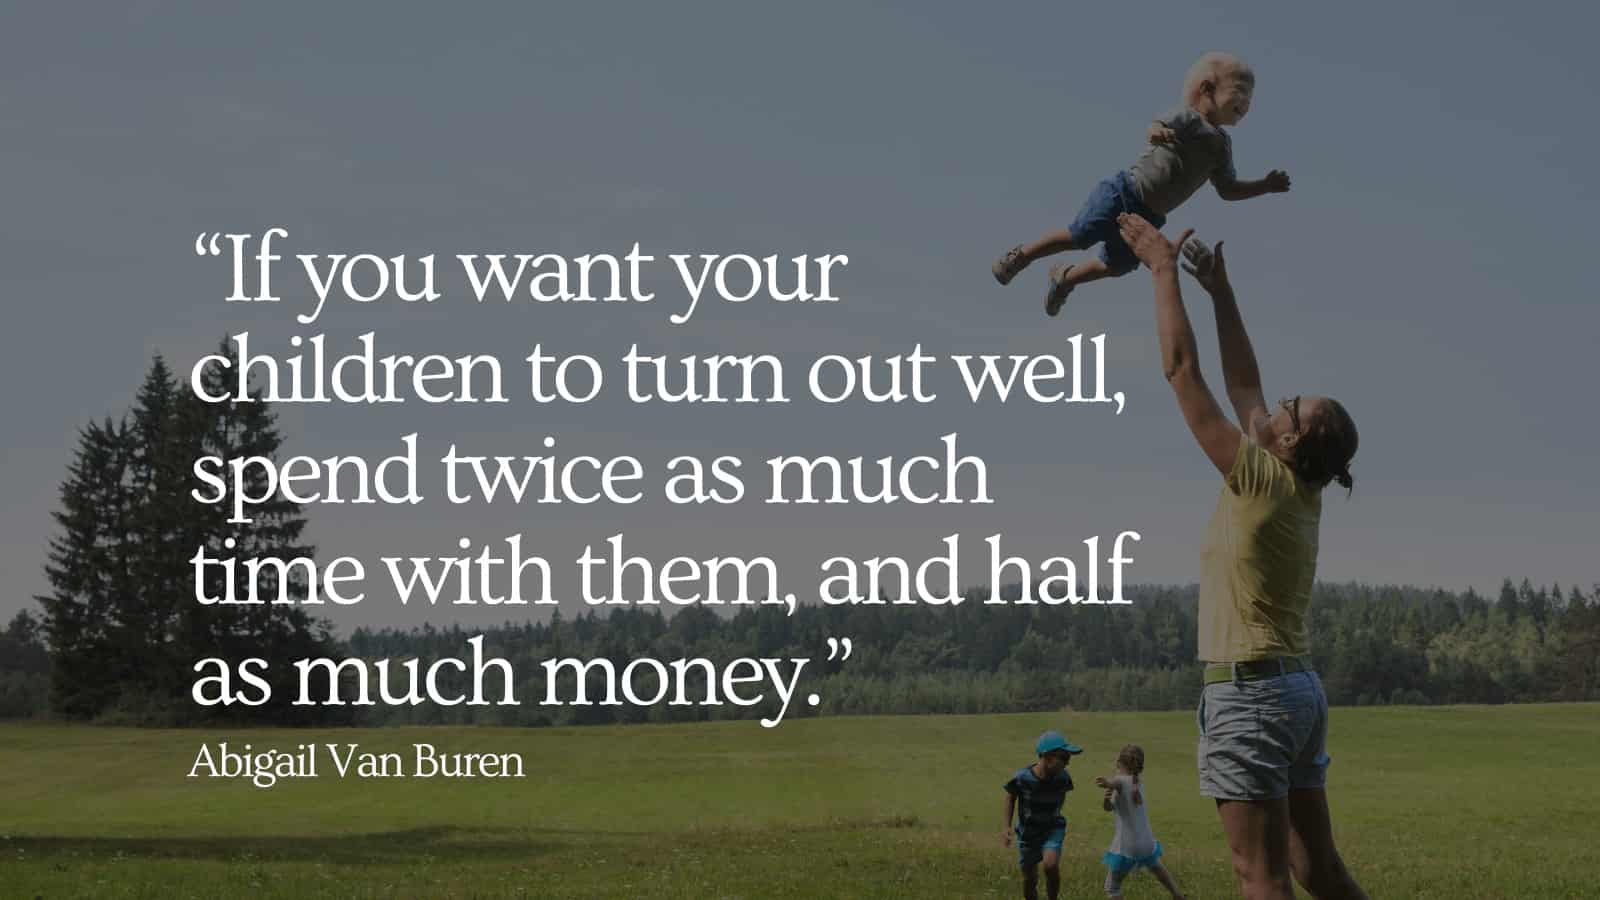 15 Inspiring Quotes About Life with Young Children